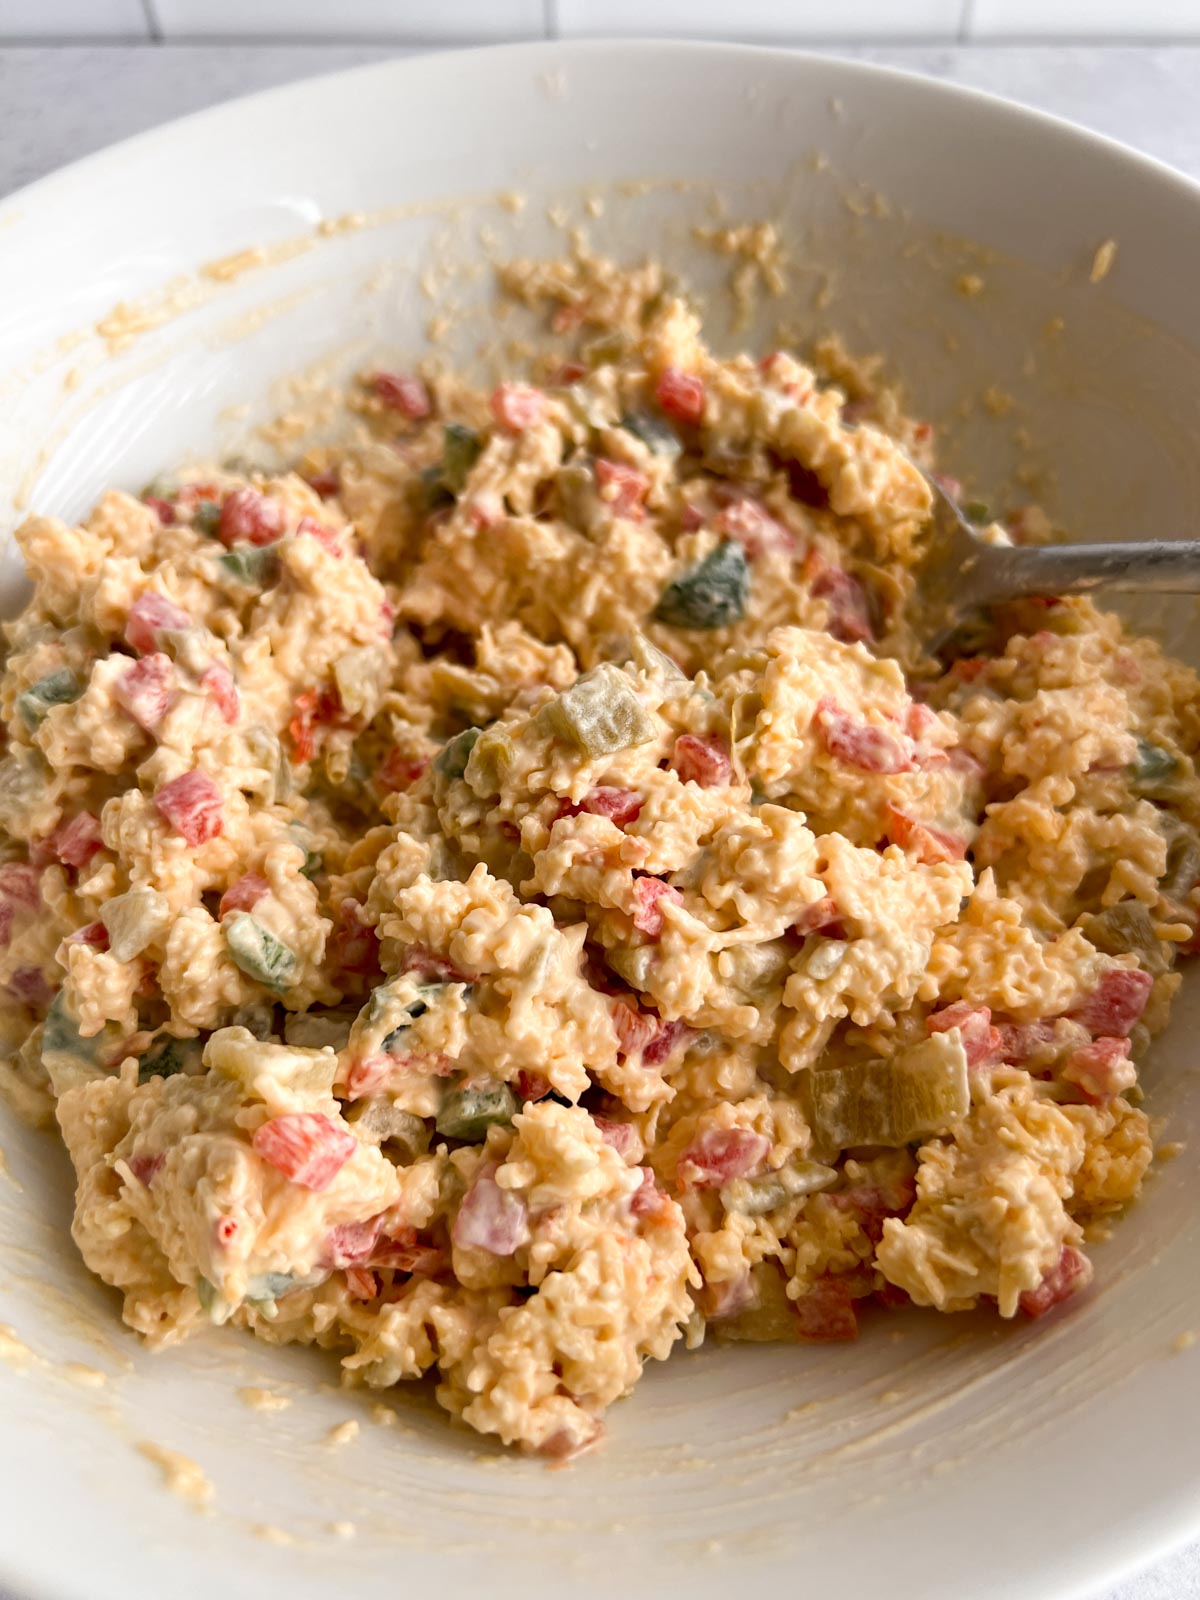 Pimento cheese in a white bowl